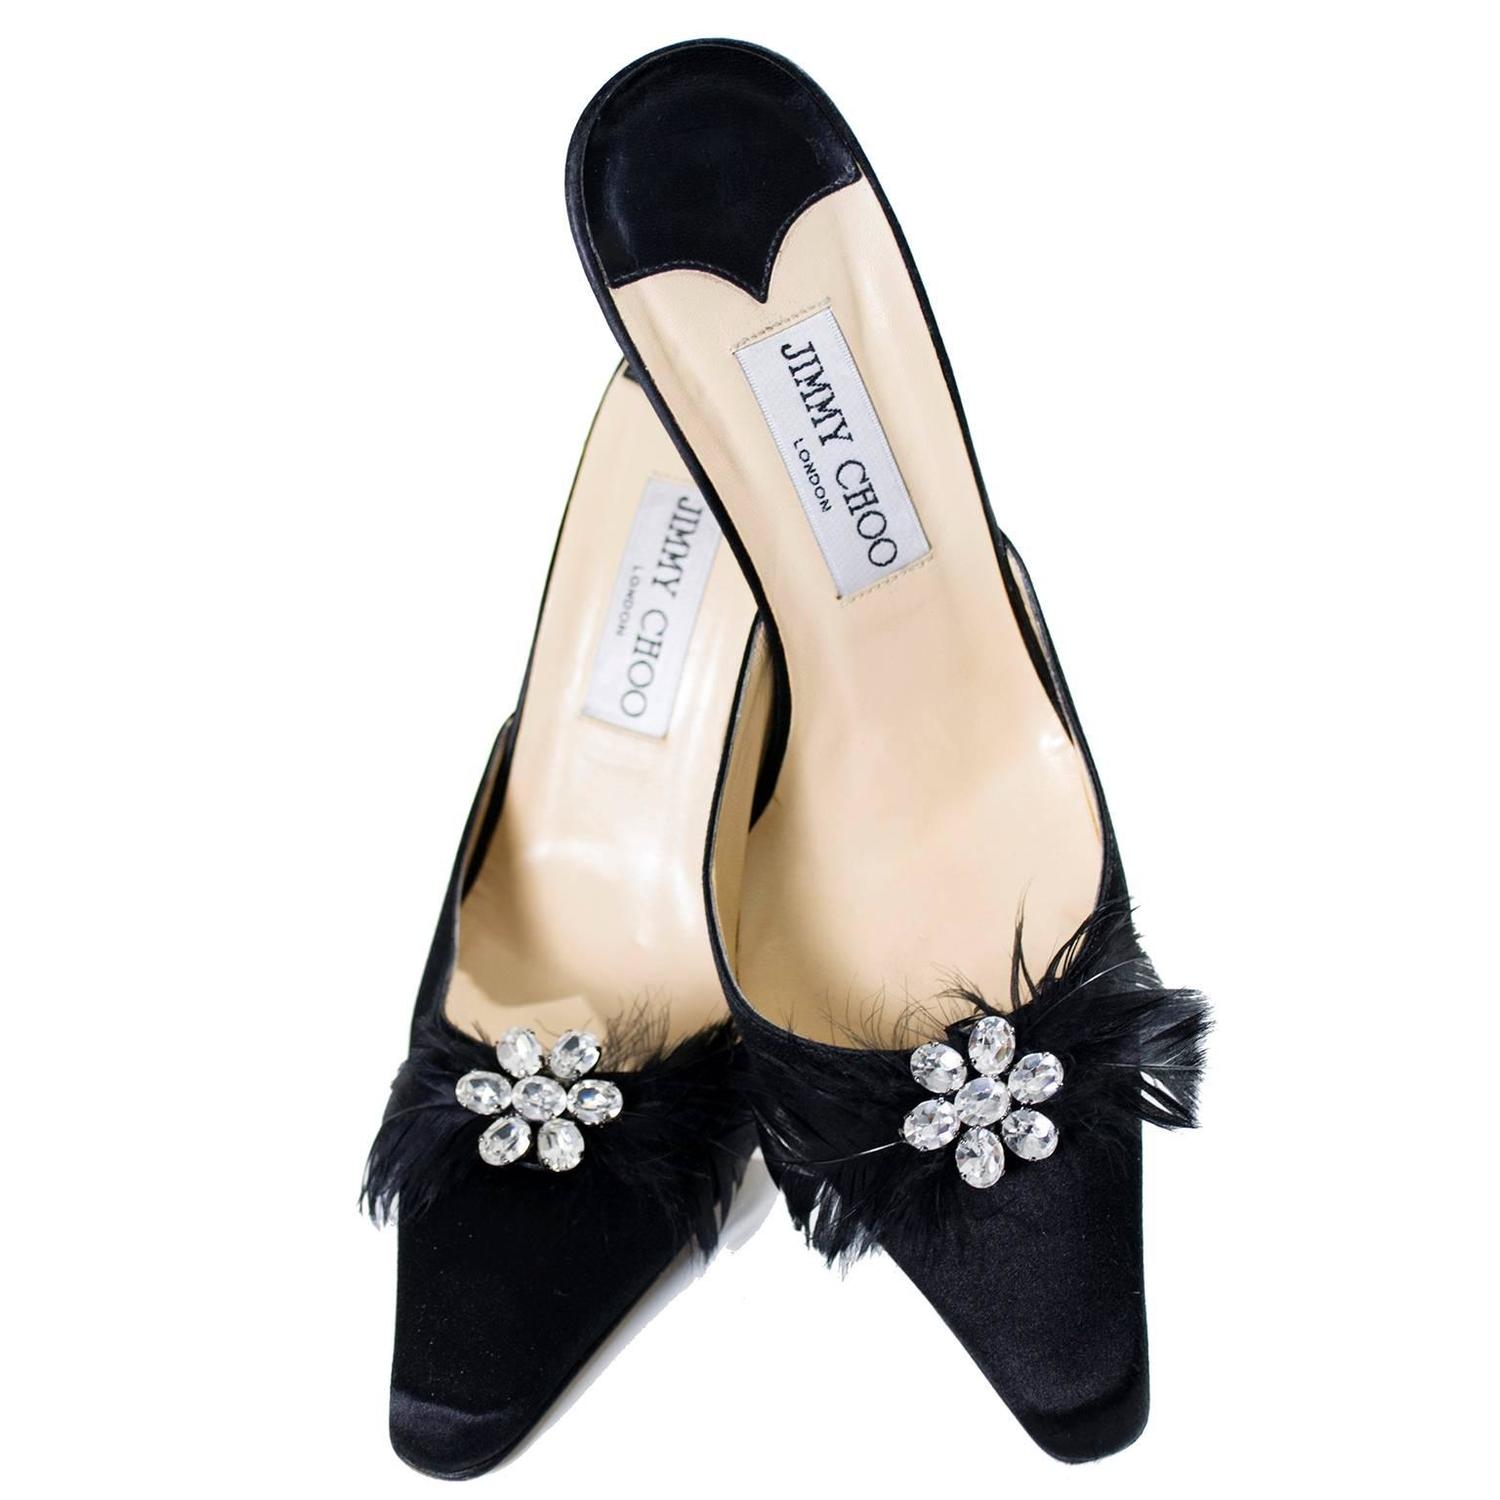 Jimmy Choo Black Satin Shoes Rhinestones Feathers Heels Size 37 For ...